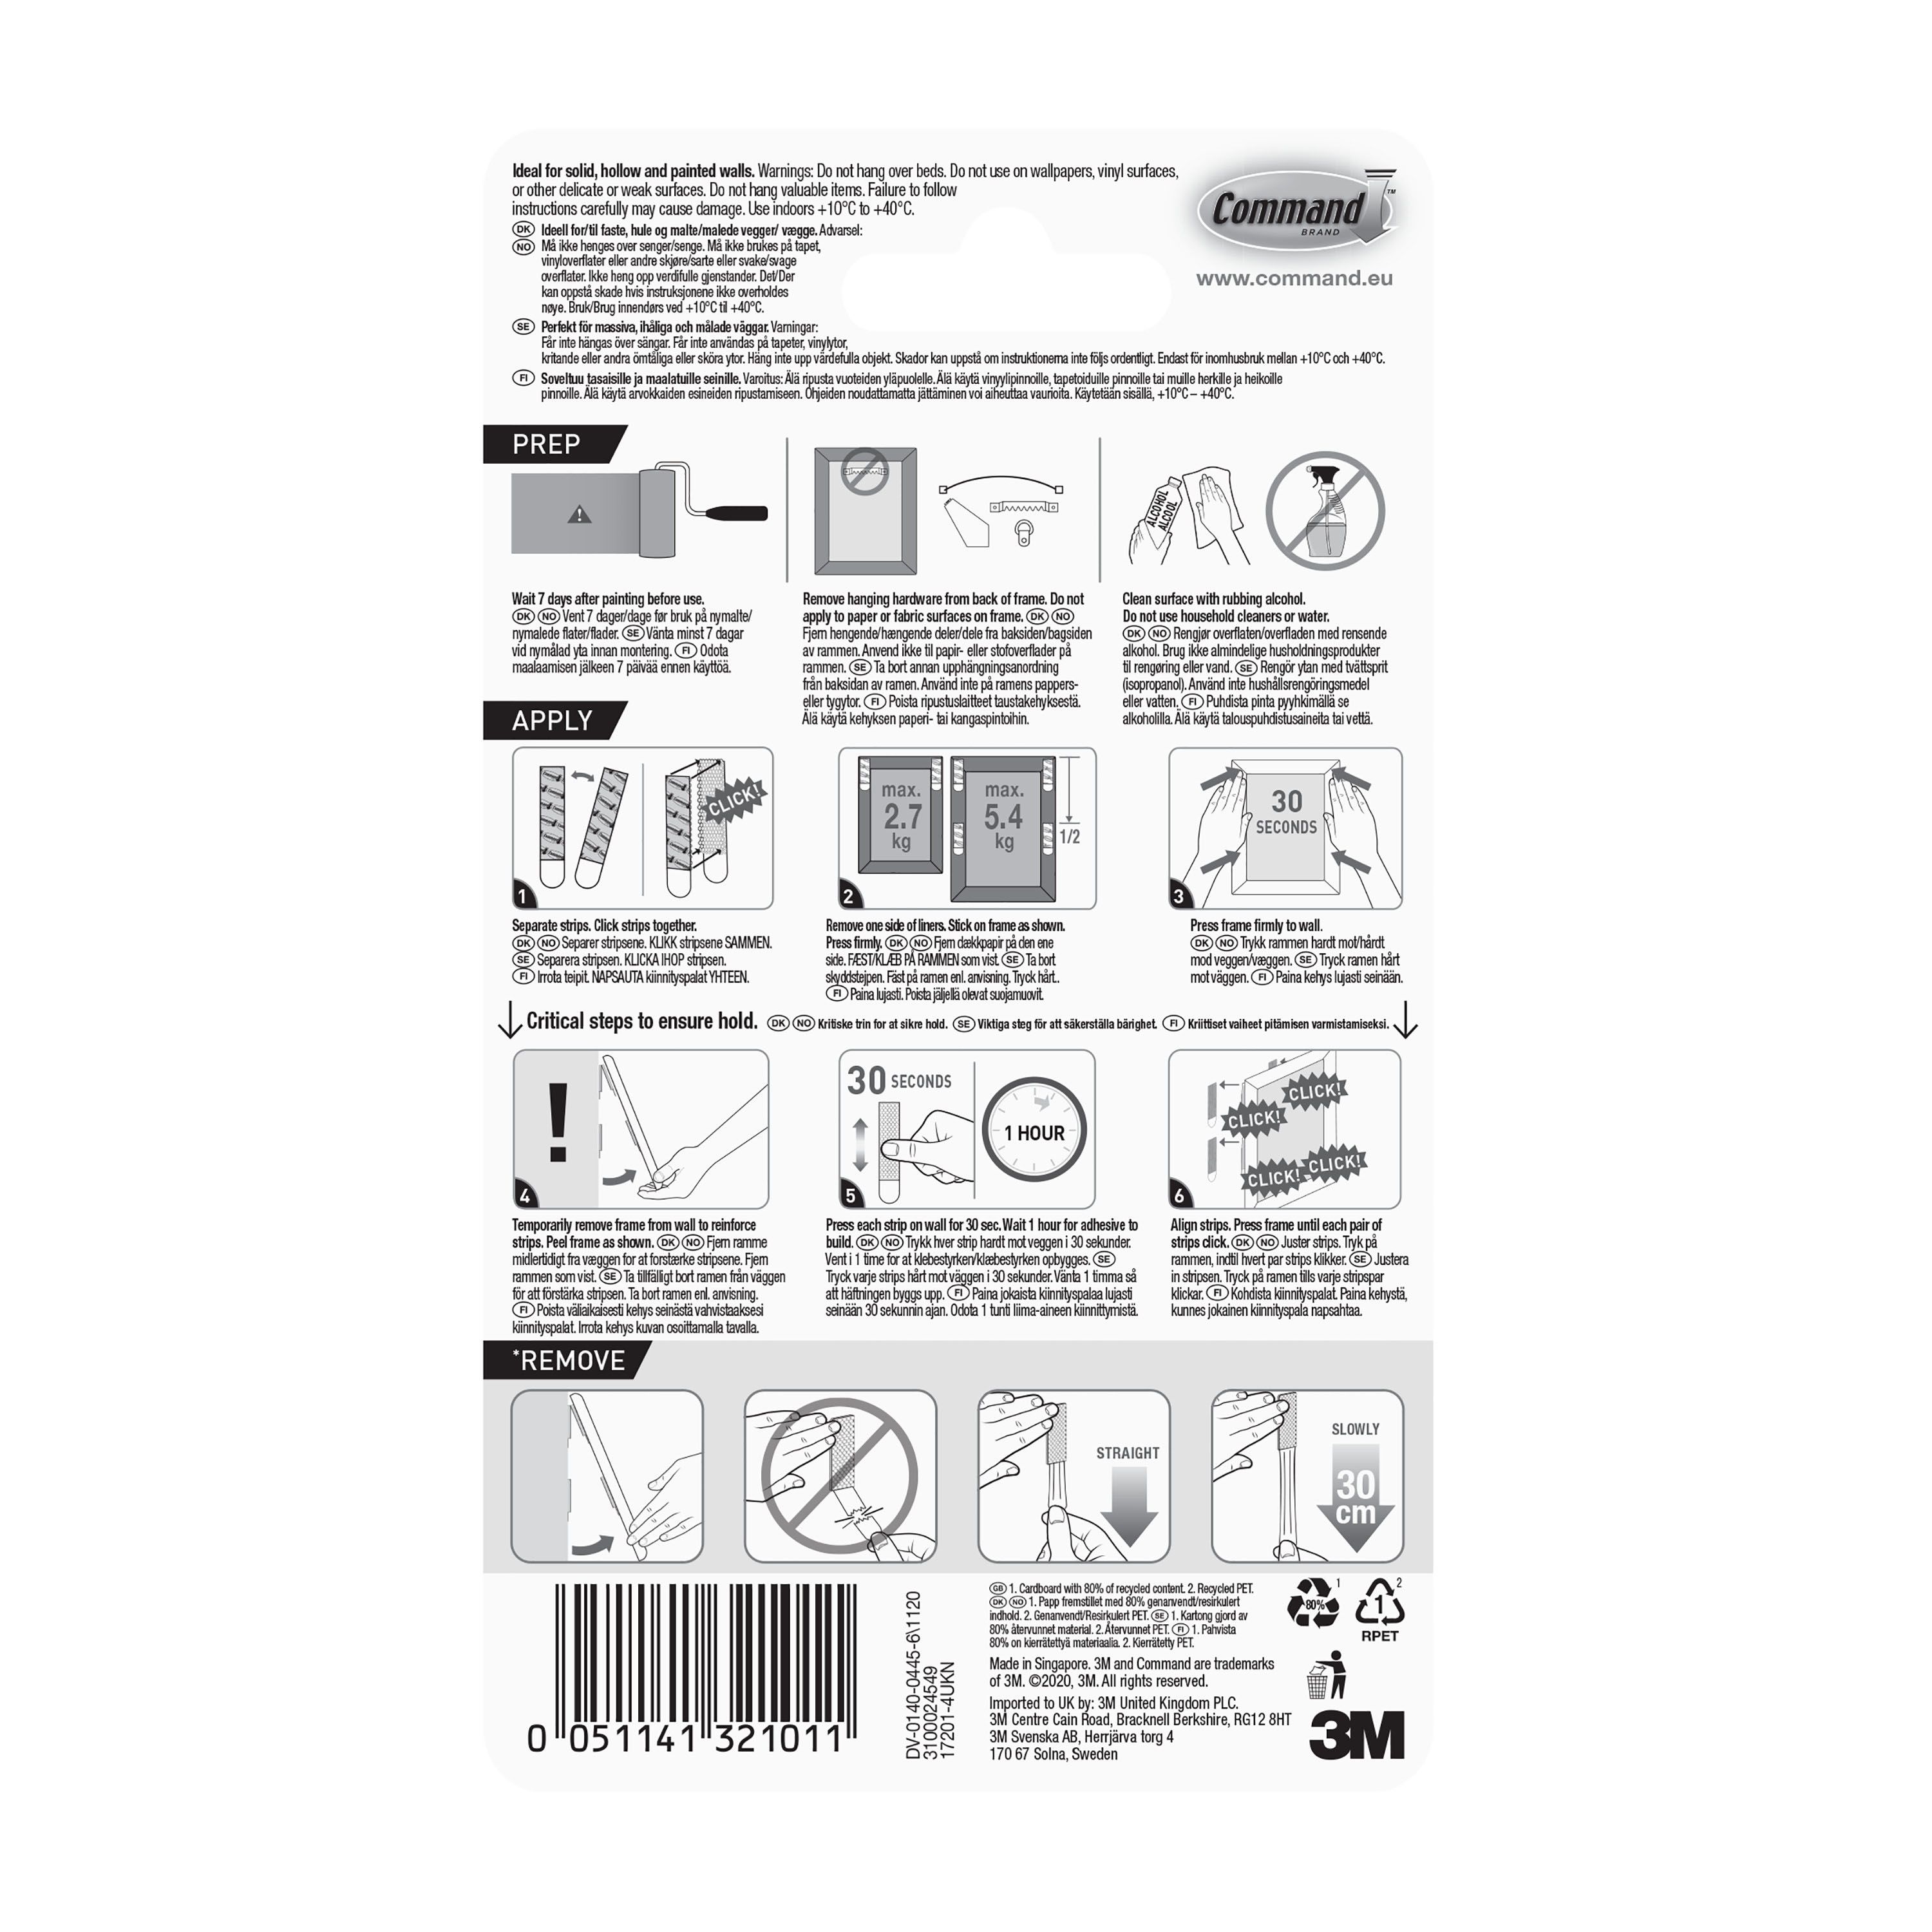 3M Command White Picture hanging Adhesive strip (Holds)5.4kg, Pack of 4